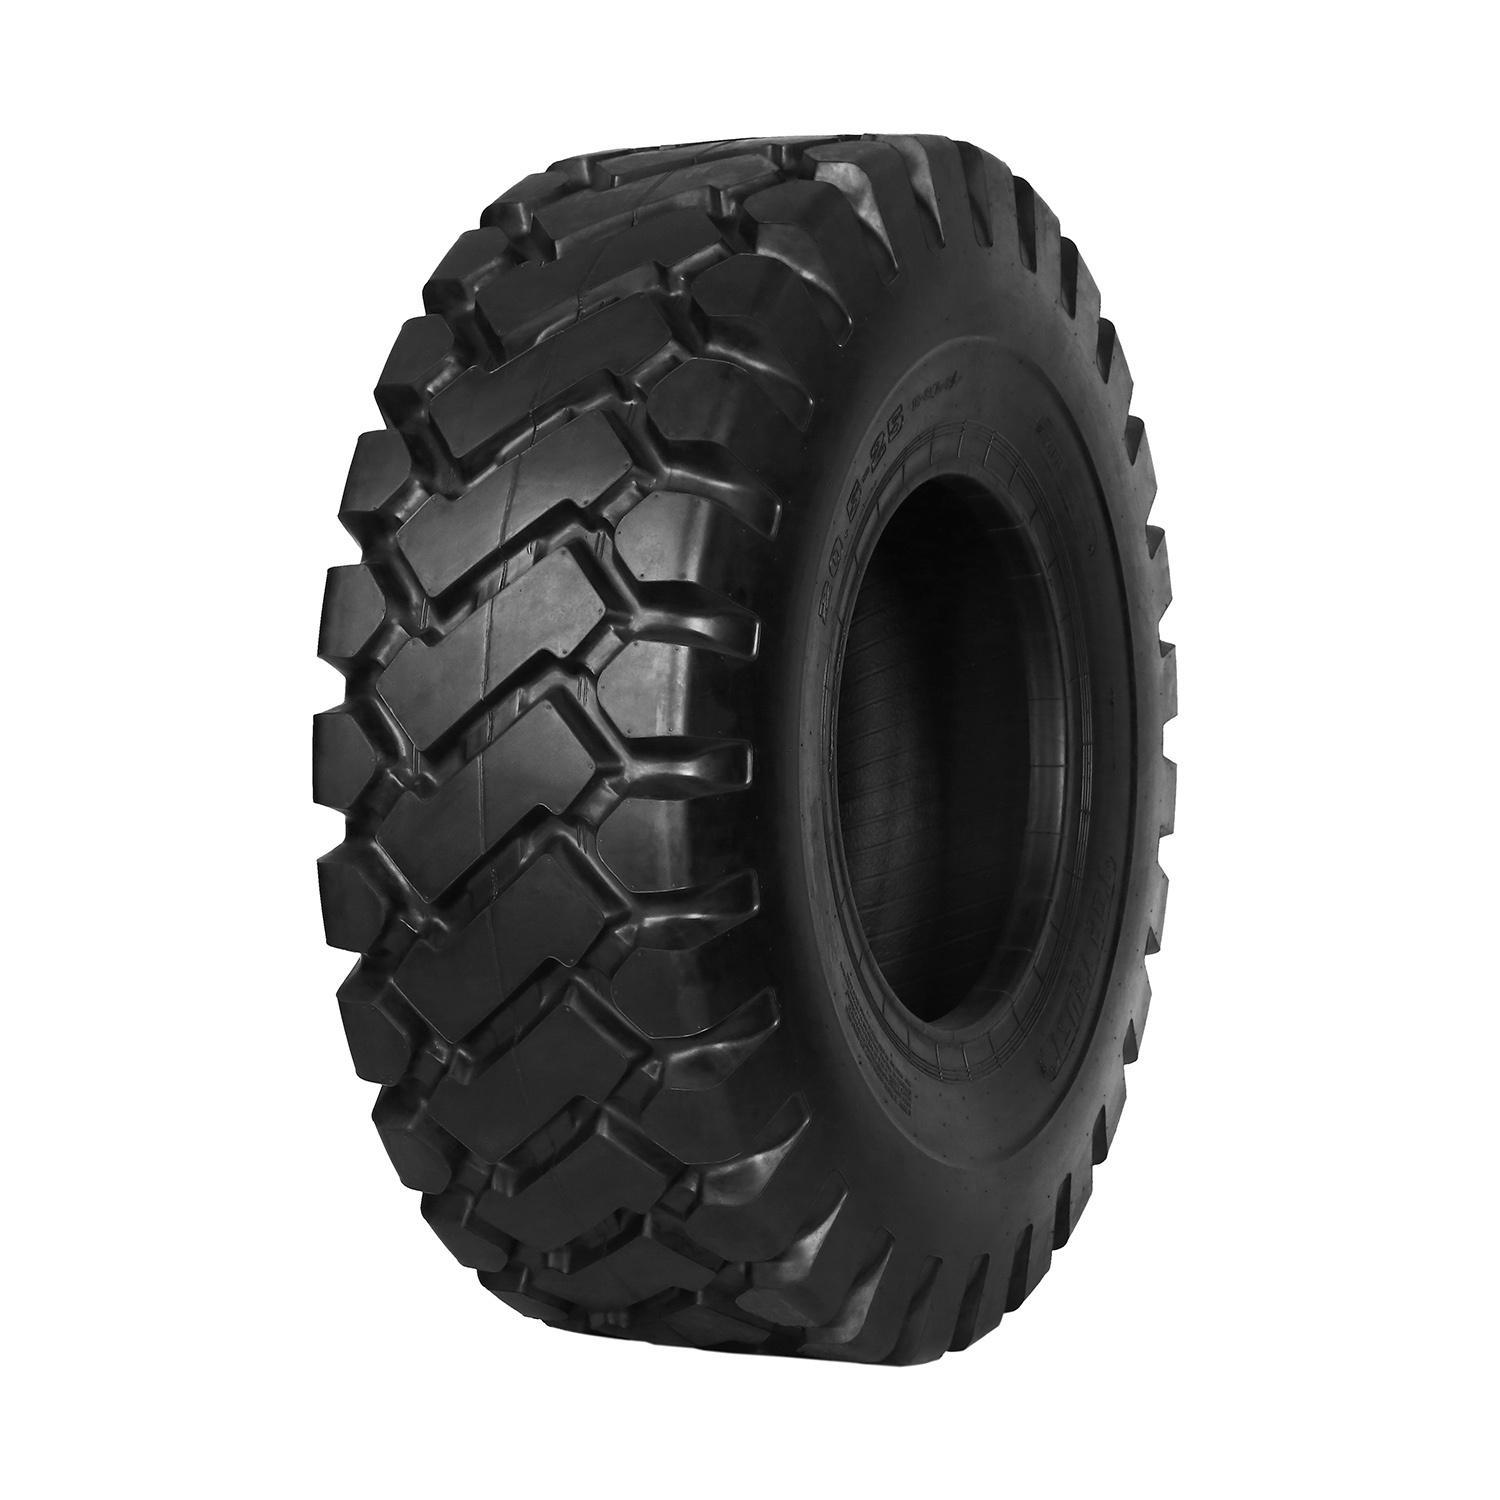 China Manufacture Top Trust Best Price OTR Tyre with Z Block Pattern E-3/ L-3 New for Heavy Dump Trucks, Scrapers and Loaders 17.5-25 20.5-25 23.5-25